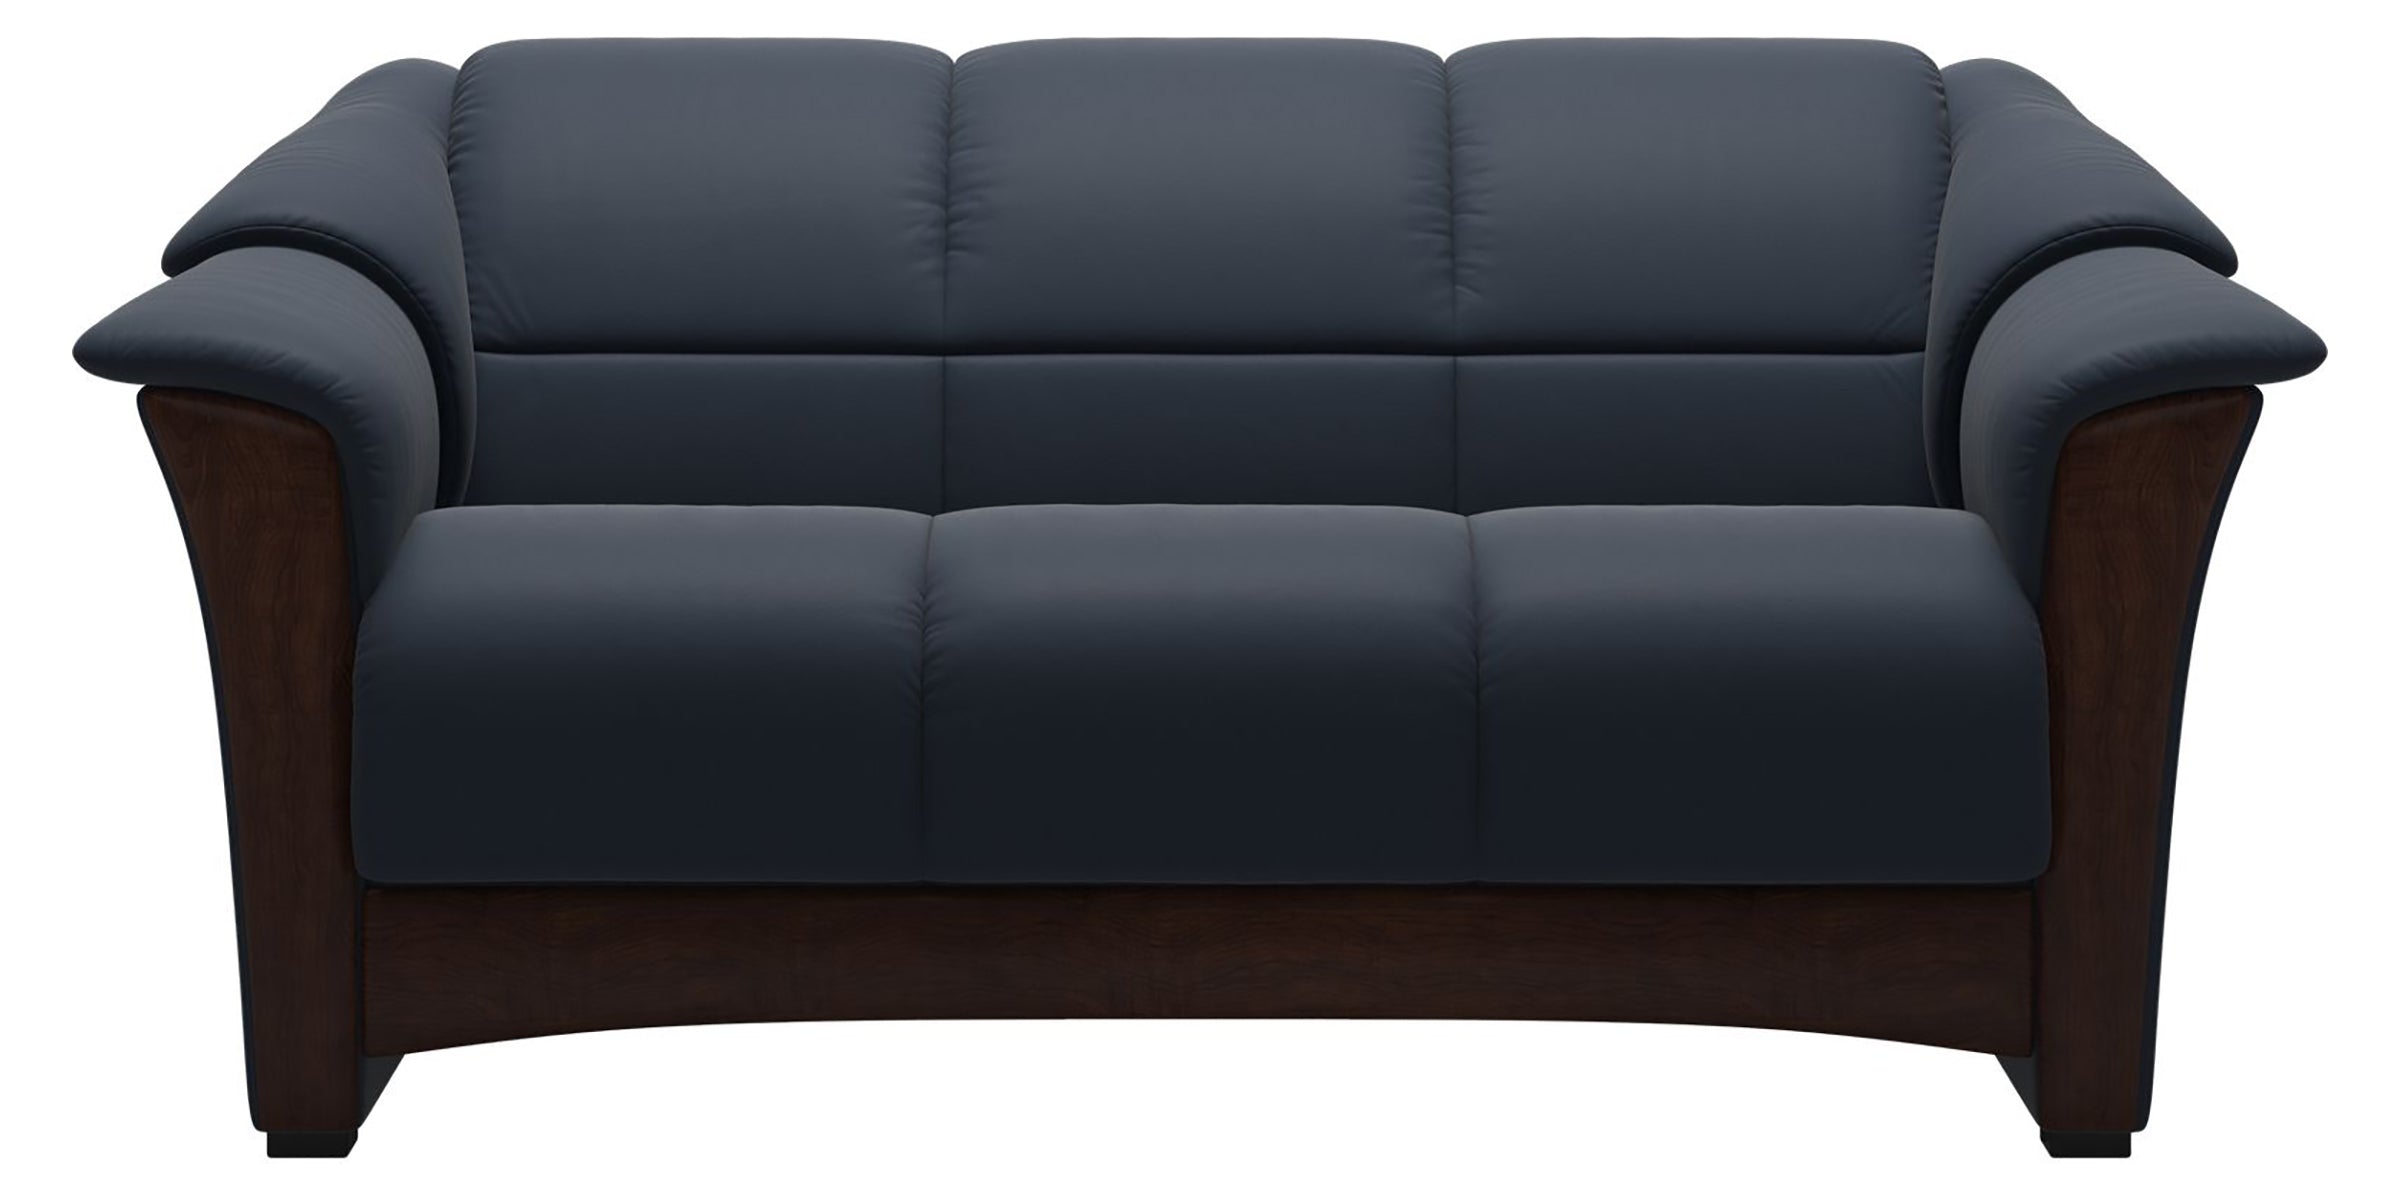 Paloma Leather Oxford Blue and Brown Base | Stressless Oslo Loveseat | Valley Ridge Furniture